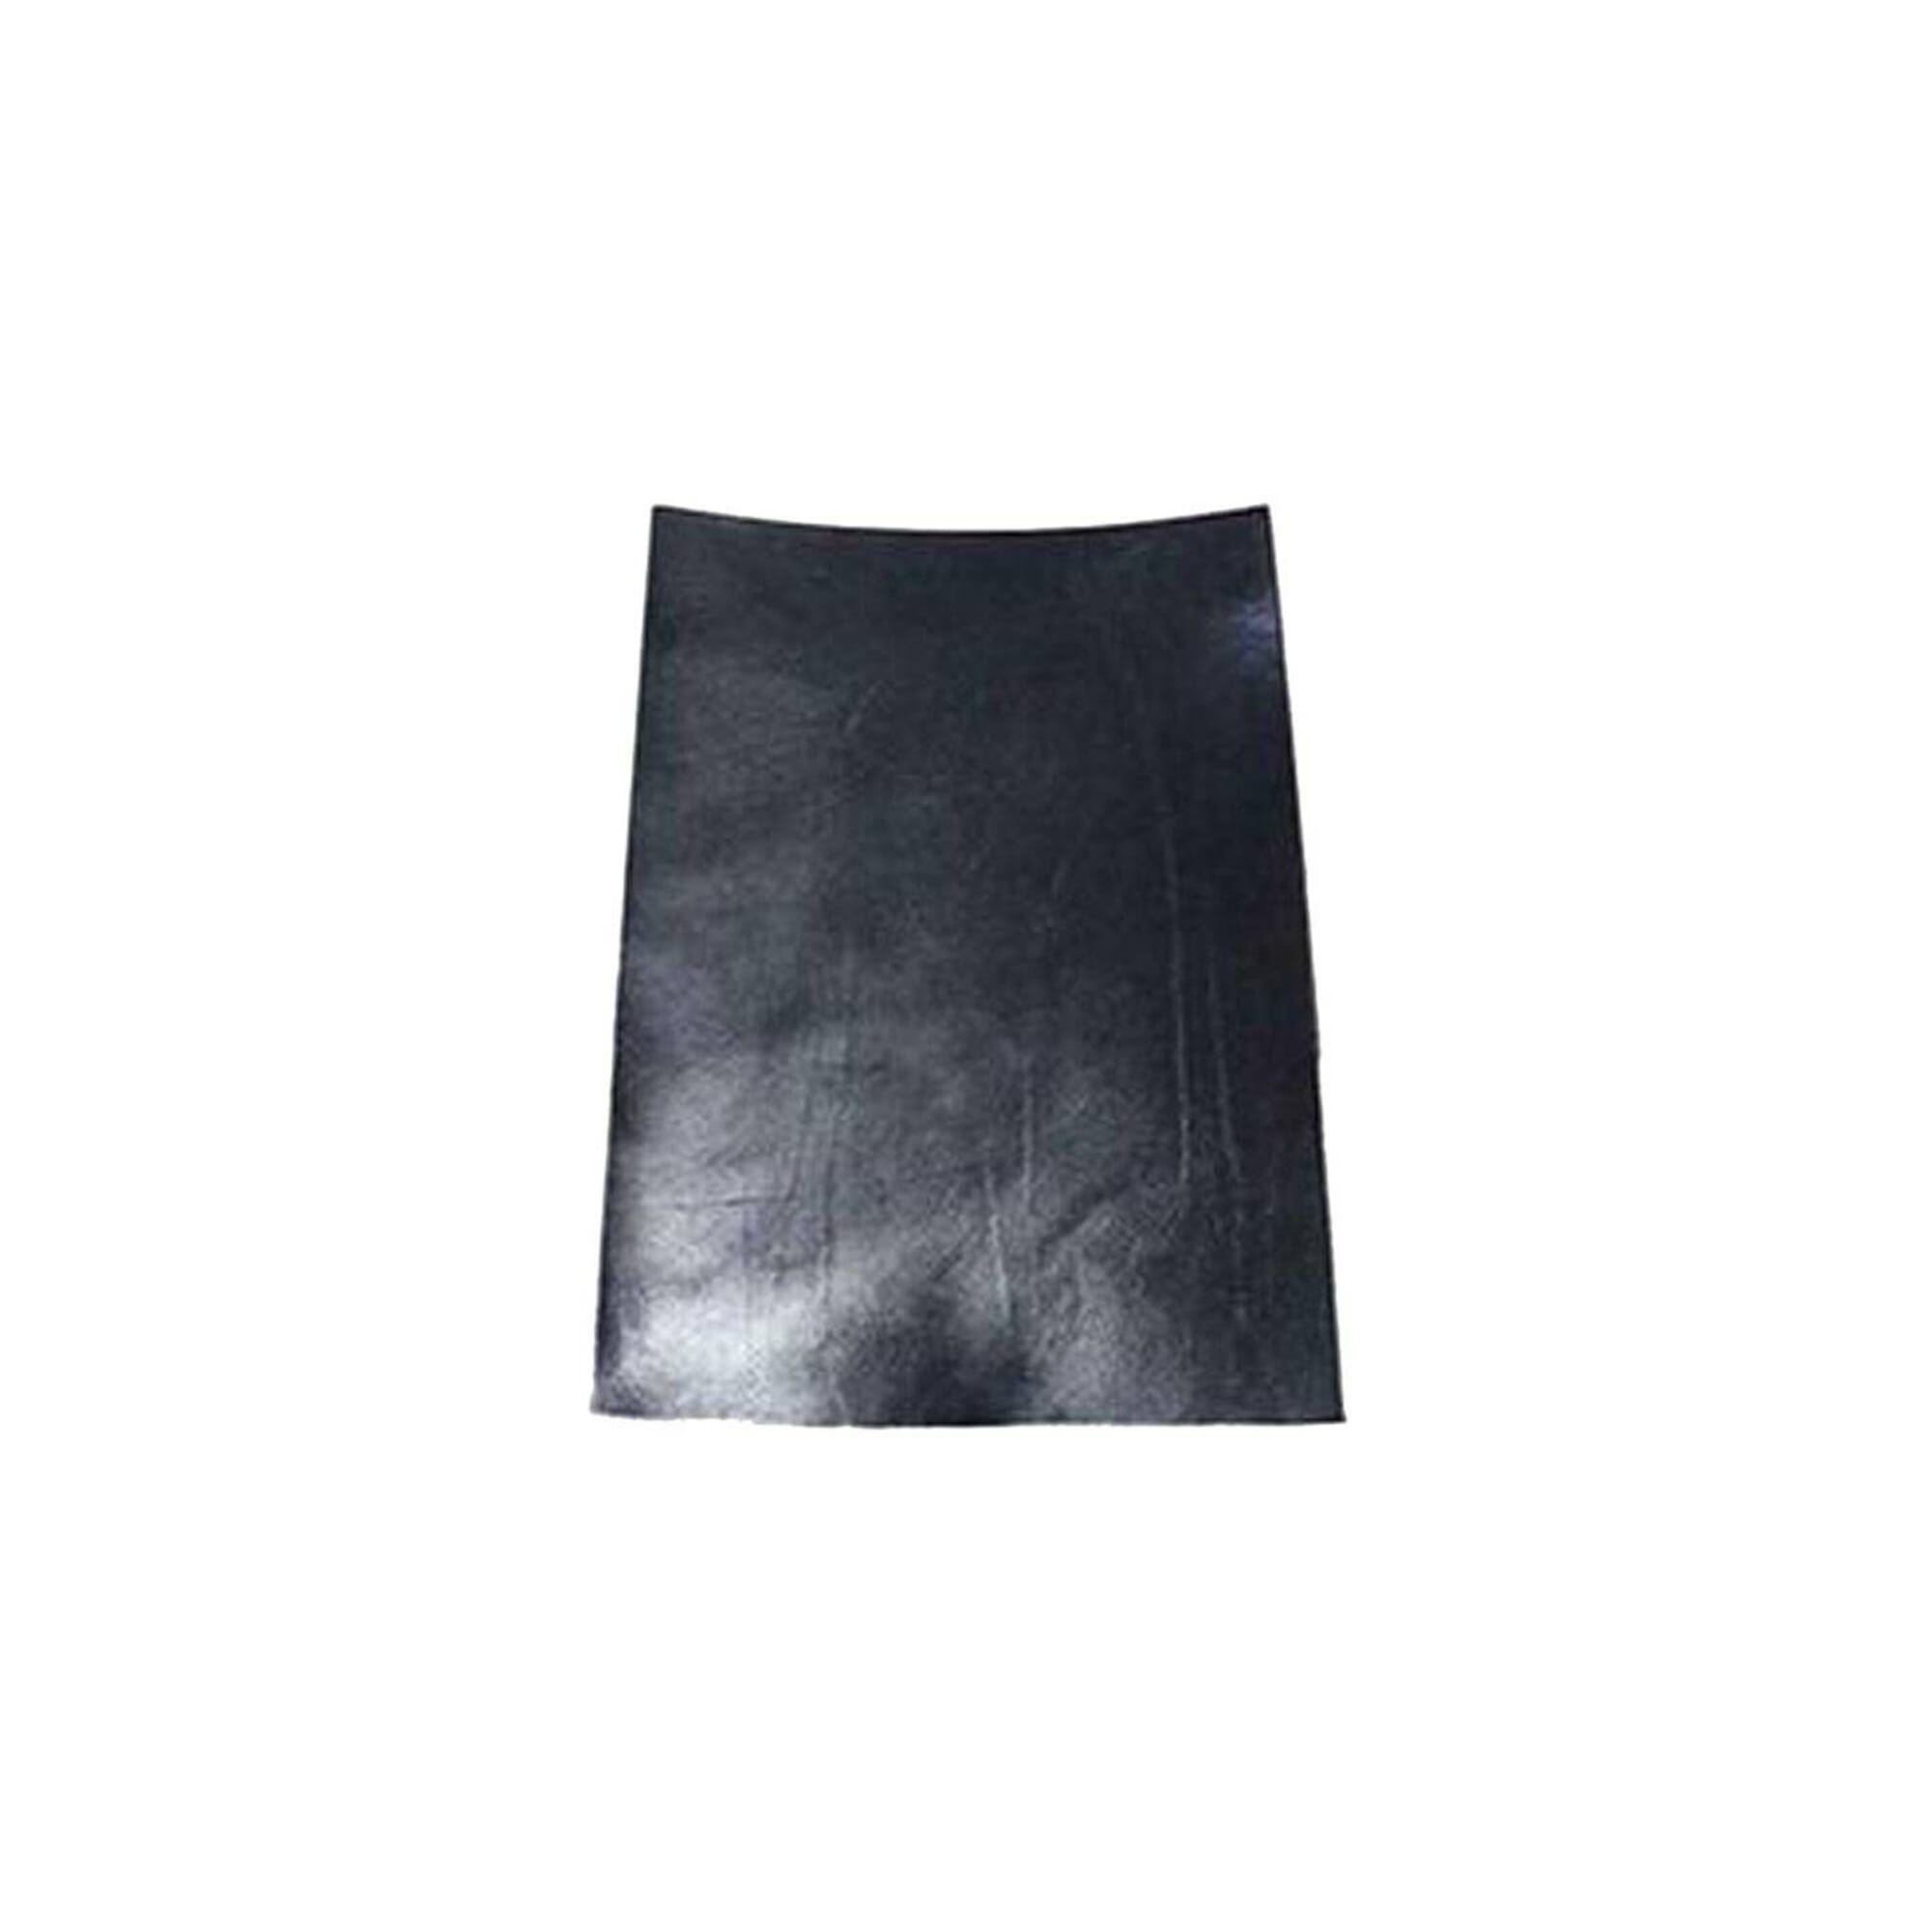 Bundle] Craft Sha Leathercraft 2.5mm Black Saddle Vegetable Tanned Cowhide Tooling  Leather, with A2-A4 Size & 400g Scrap, for Leatherworking